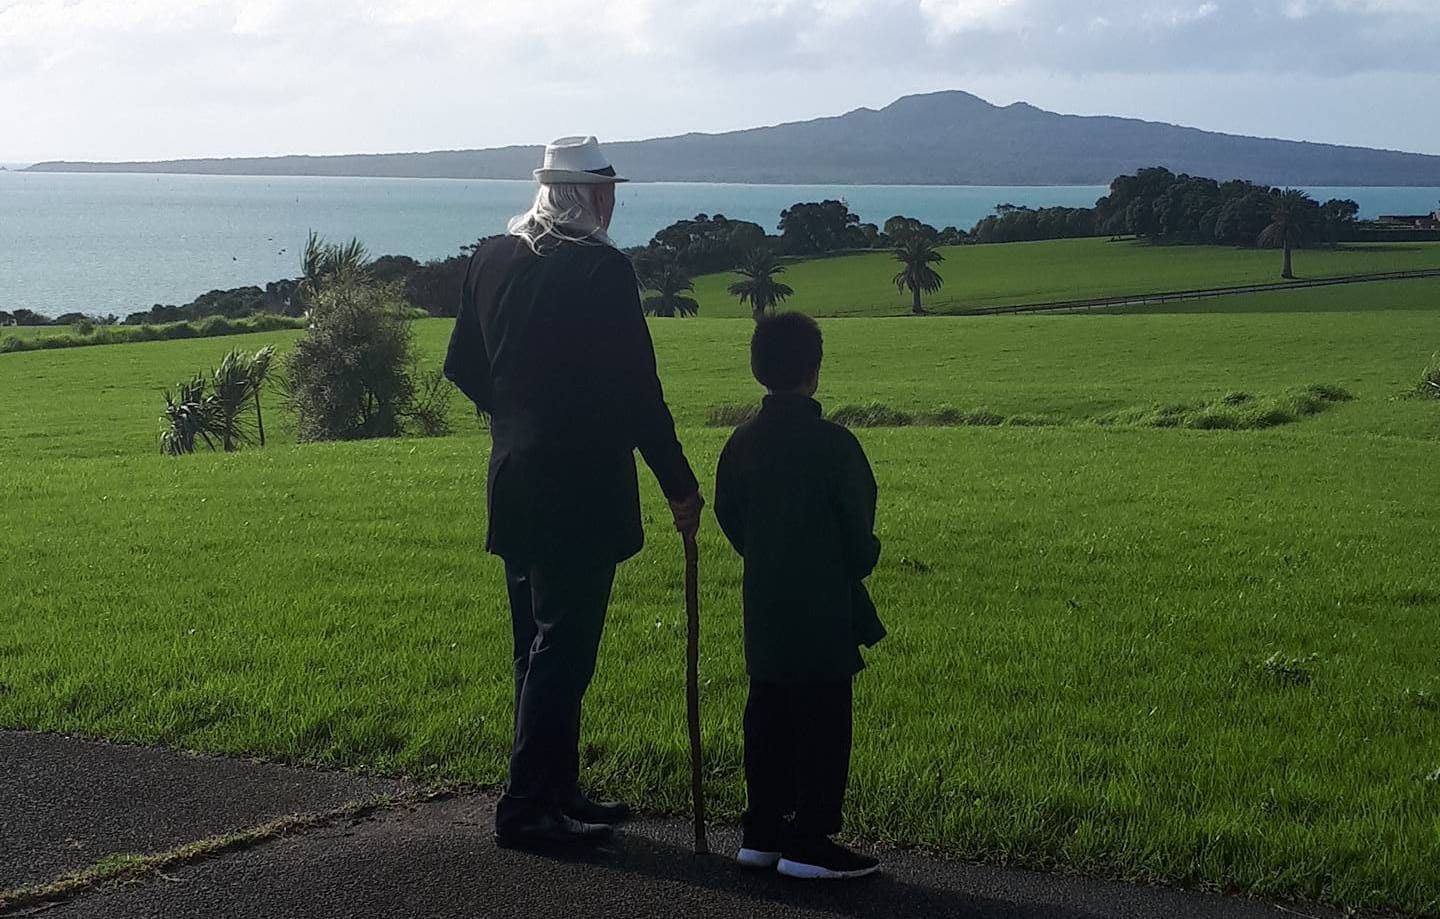 Taiaha Hawke at Takaparawhau on the 40th commemorations since the land occupation.